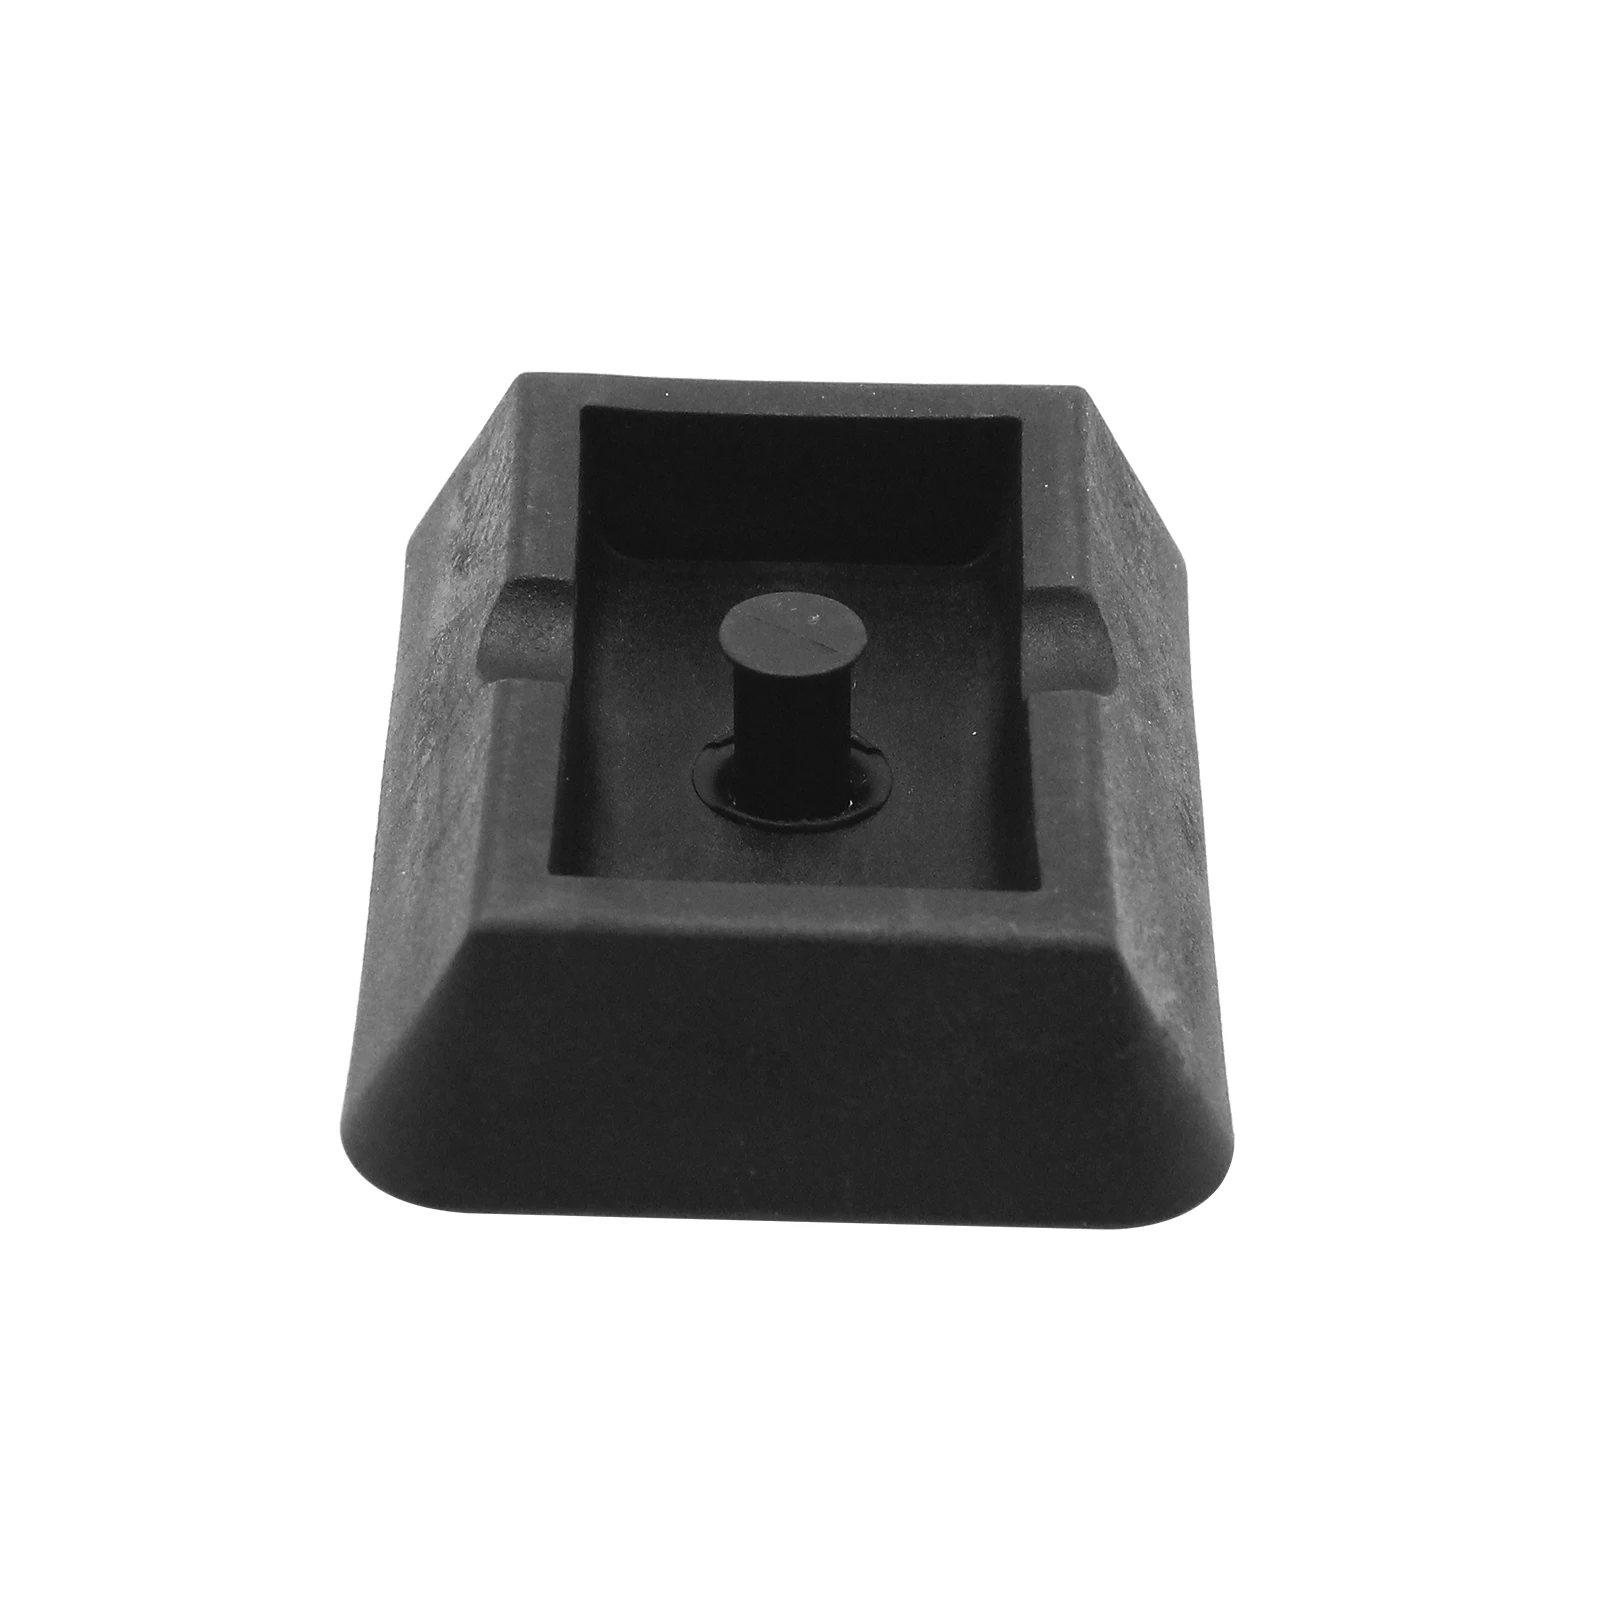 

Jack Point Pad Jacking Point Support Plug Lift Block Replacement for BMW E46 E63 E64 E65 E85 E86 X5 E53 X3 E89 Z4